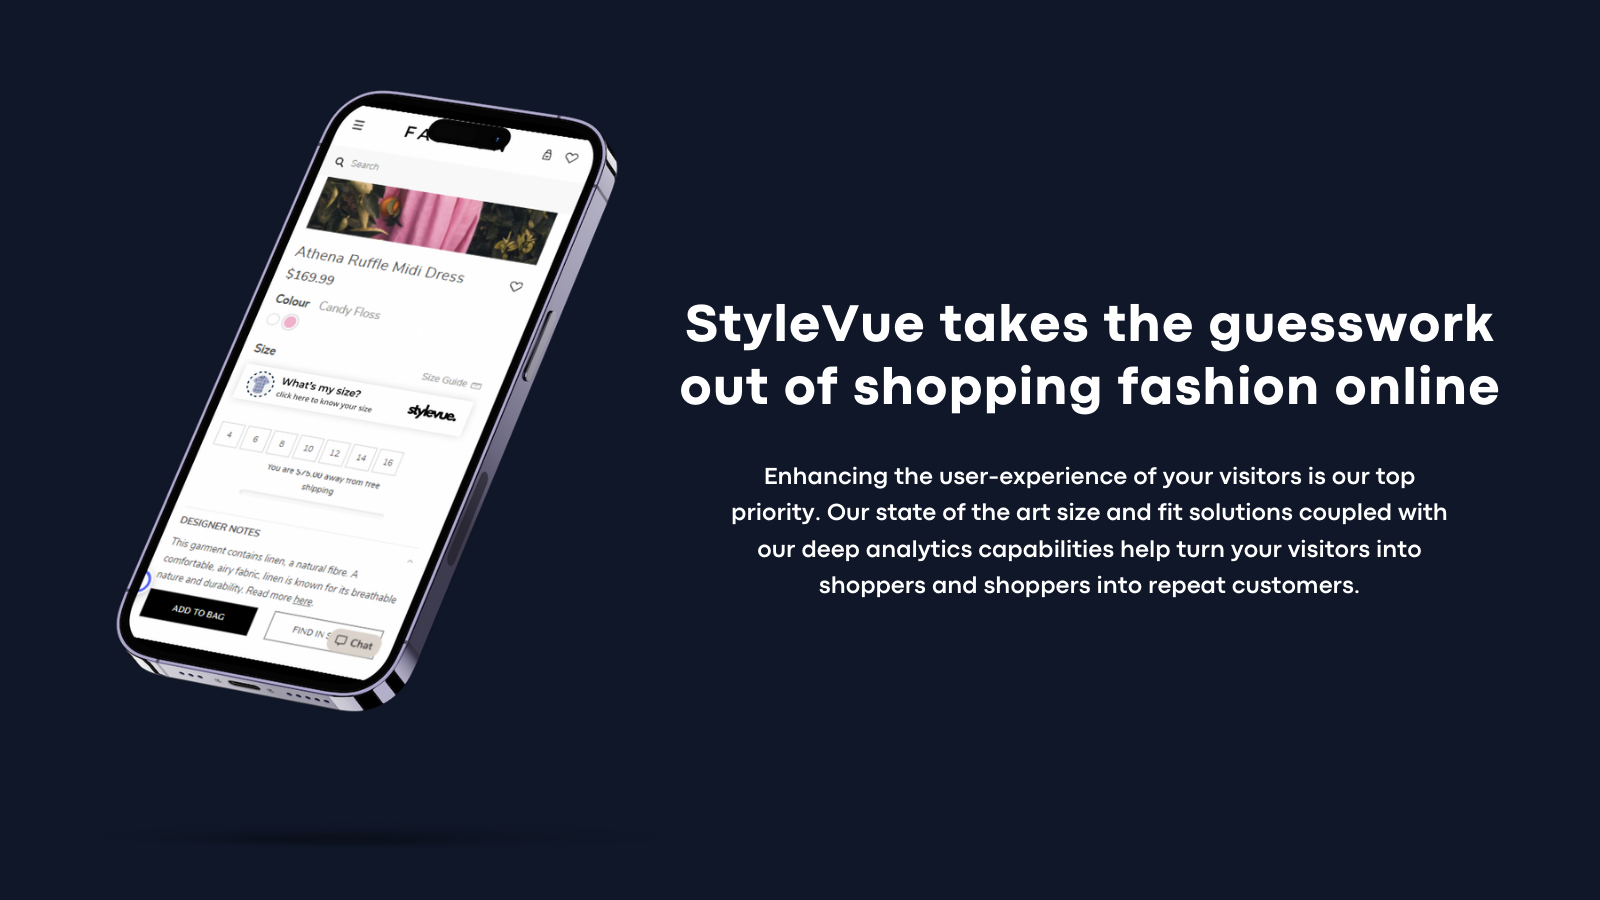 What is StyleVue